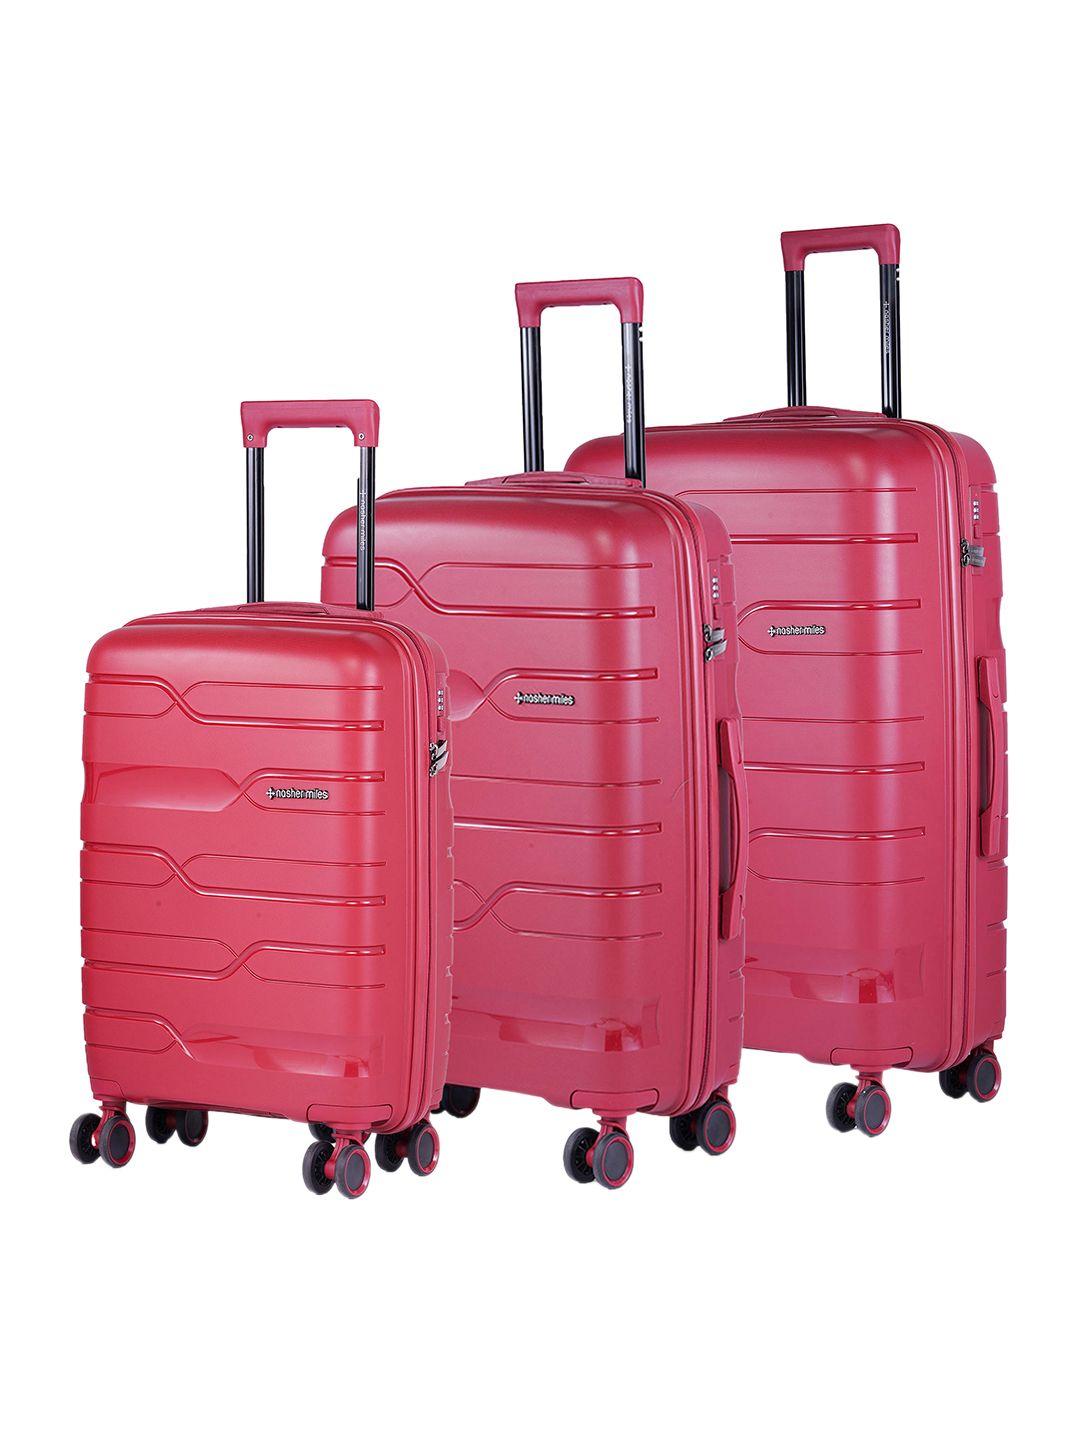 nasher miles set of 3 maroon textured hard-sided cabin trolley suitcase